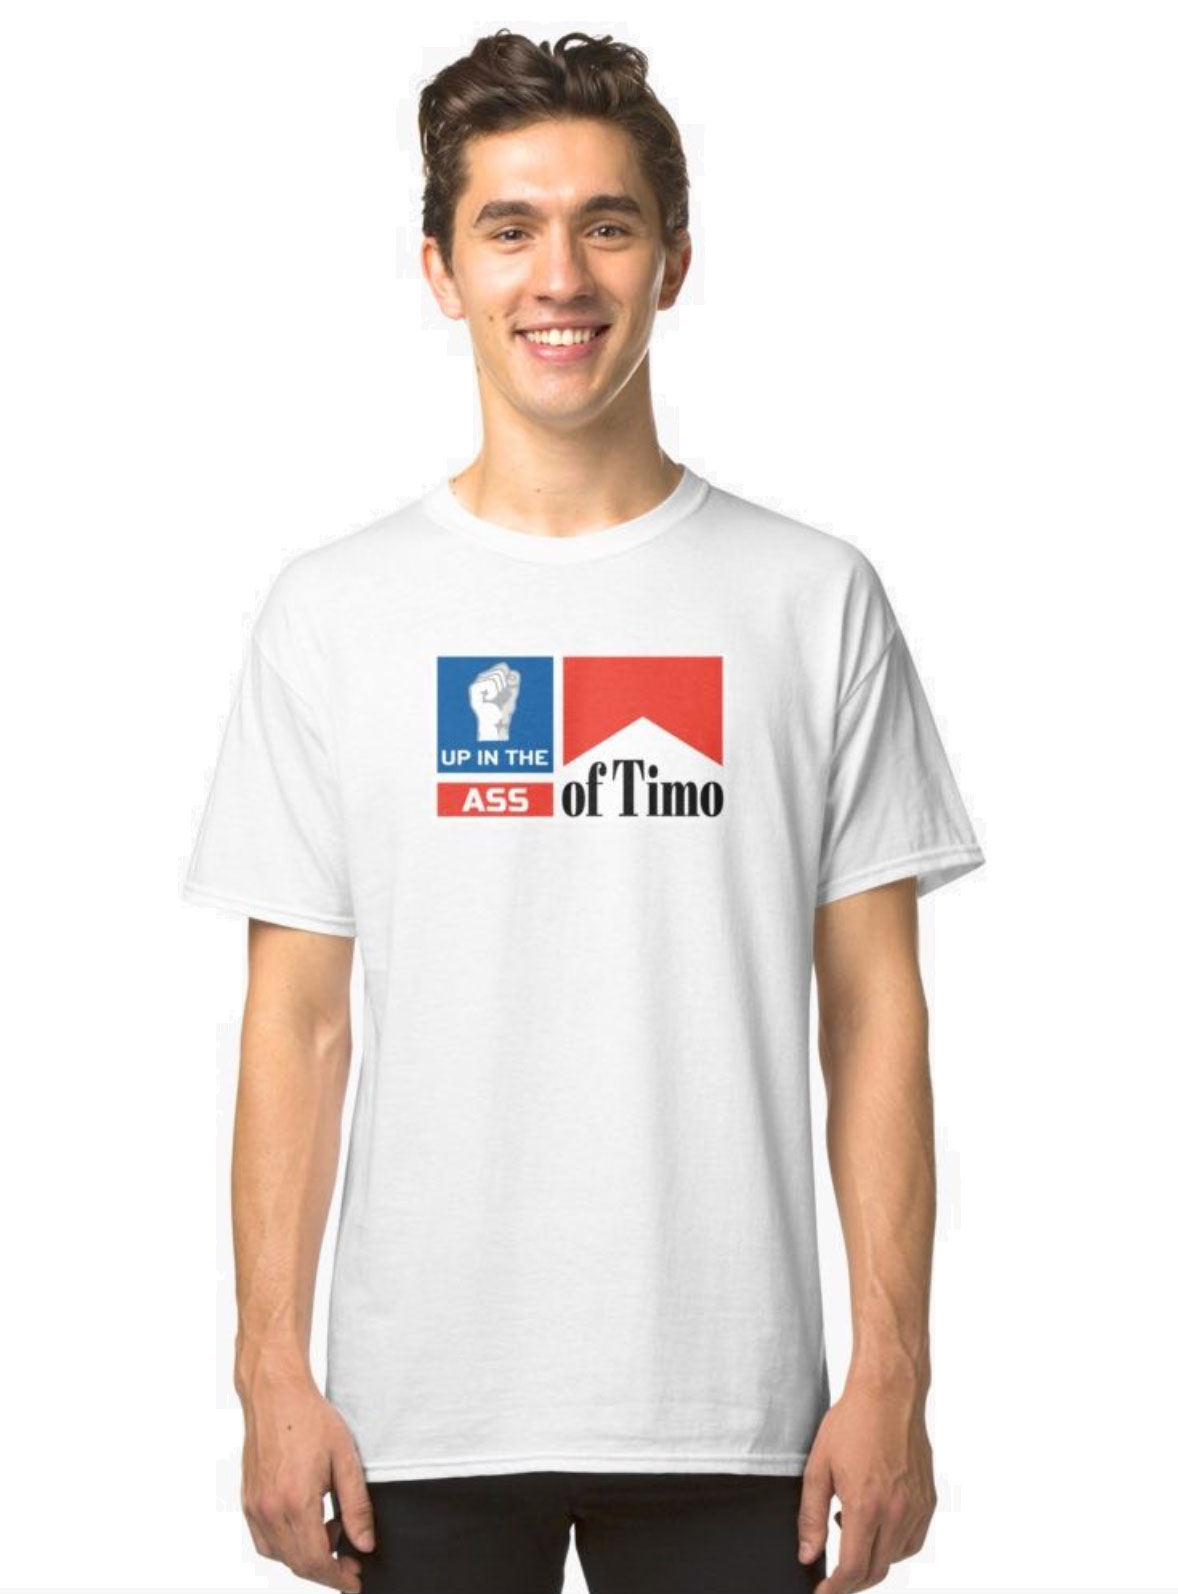 Up in the Ass of Timo T-shirt